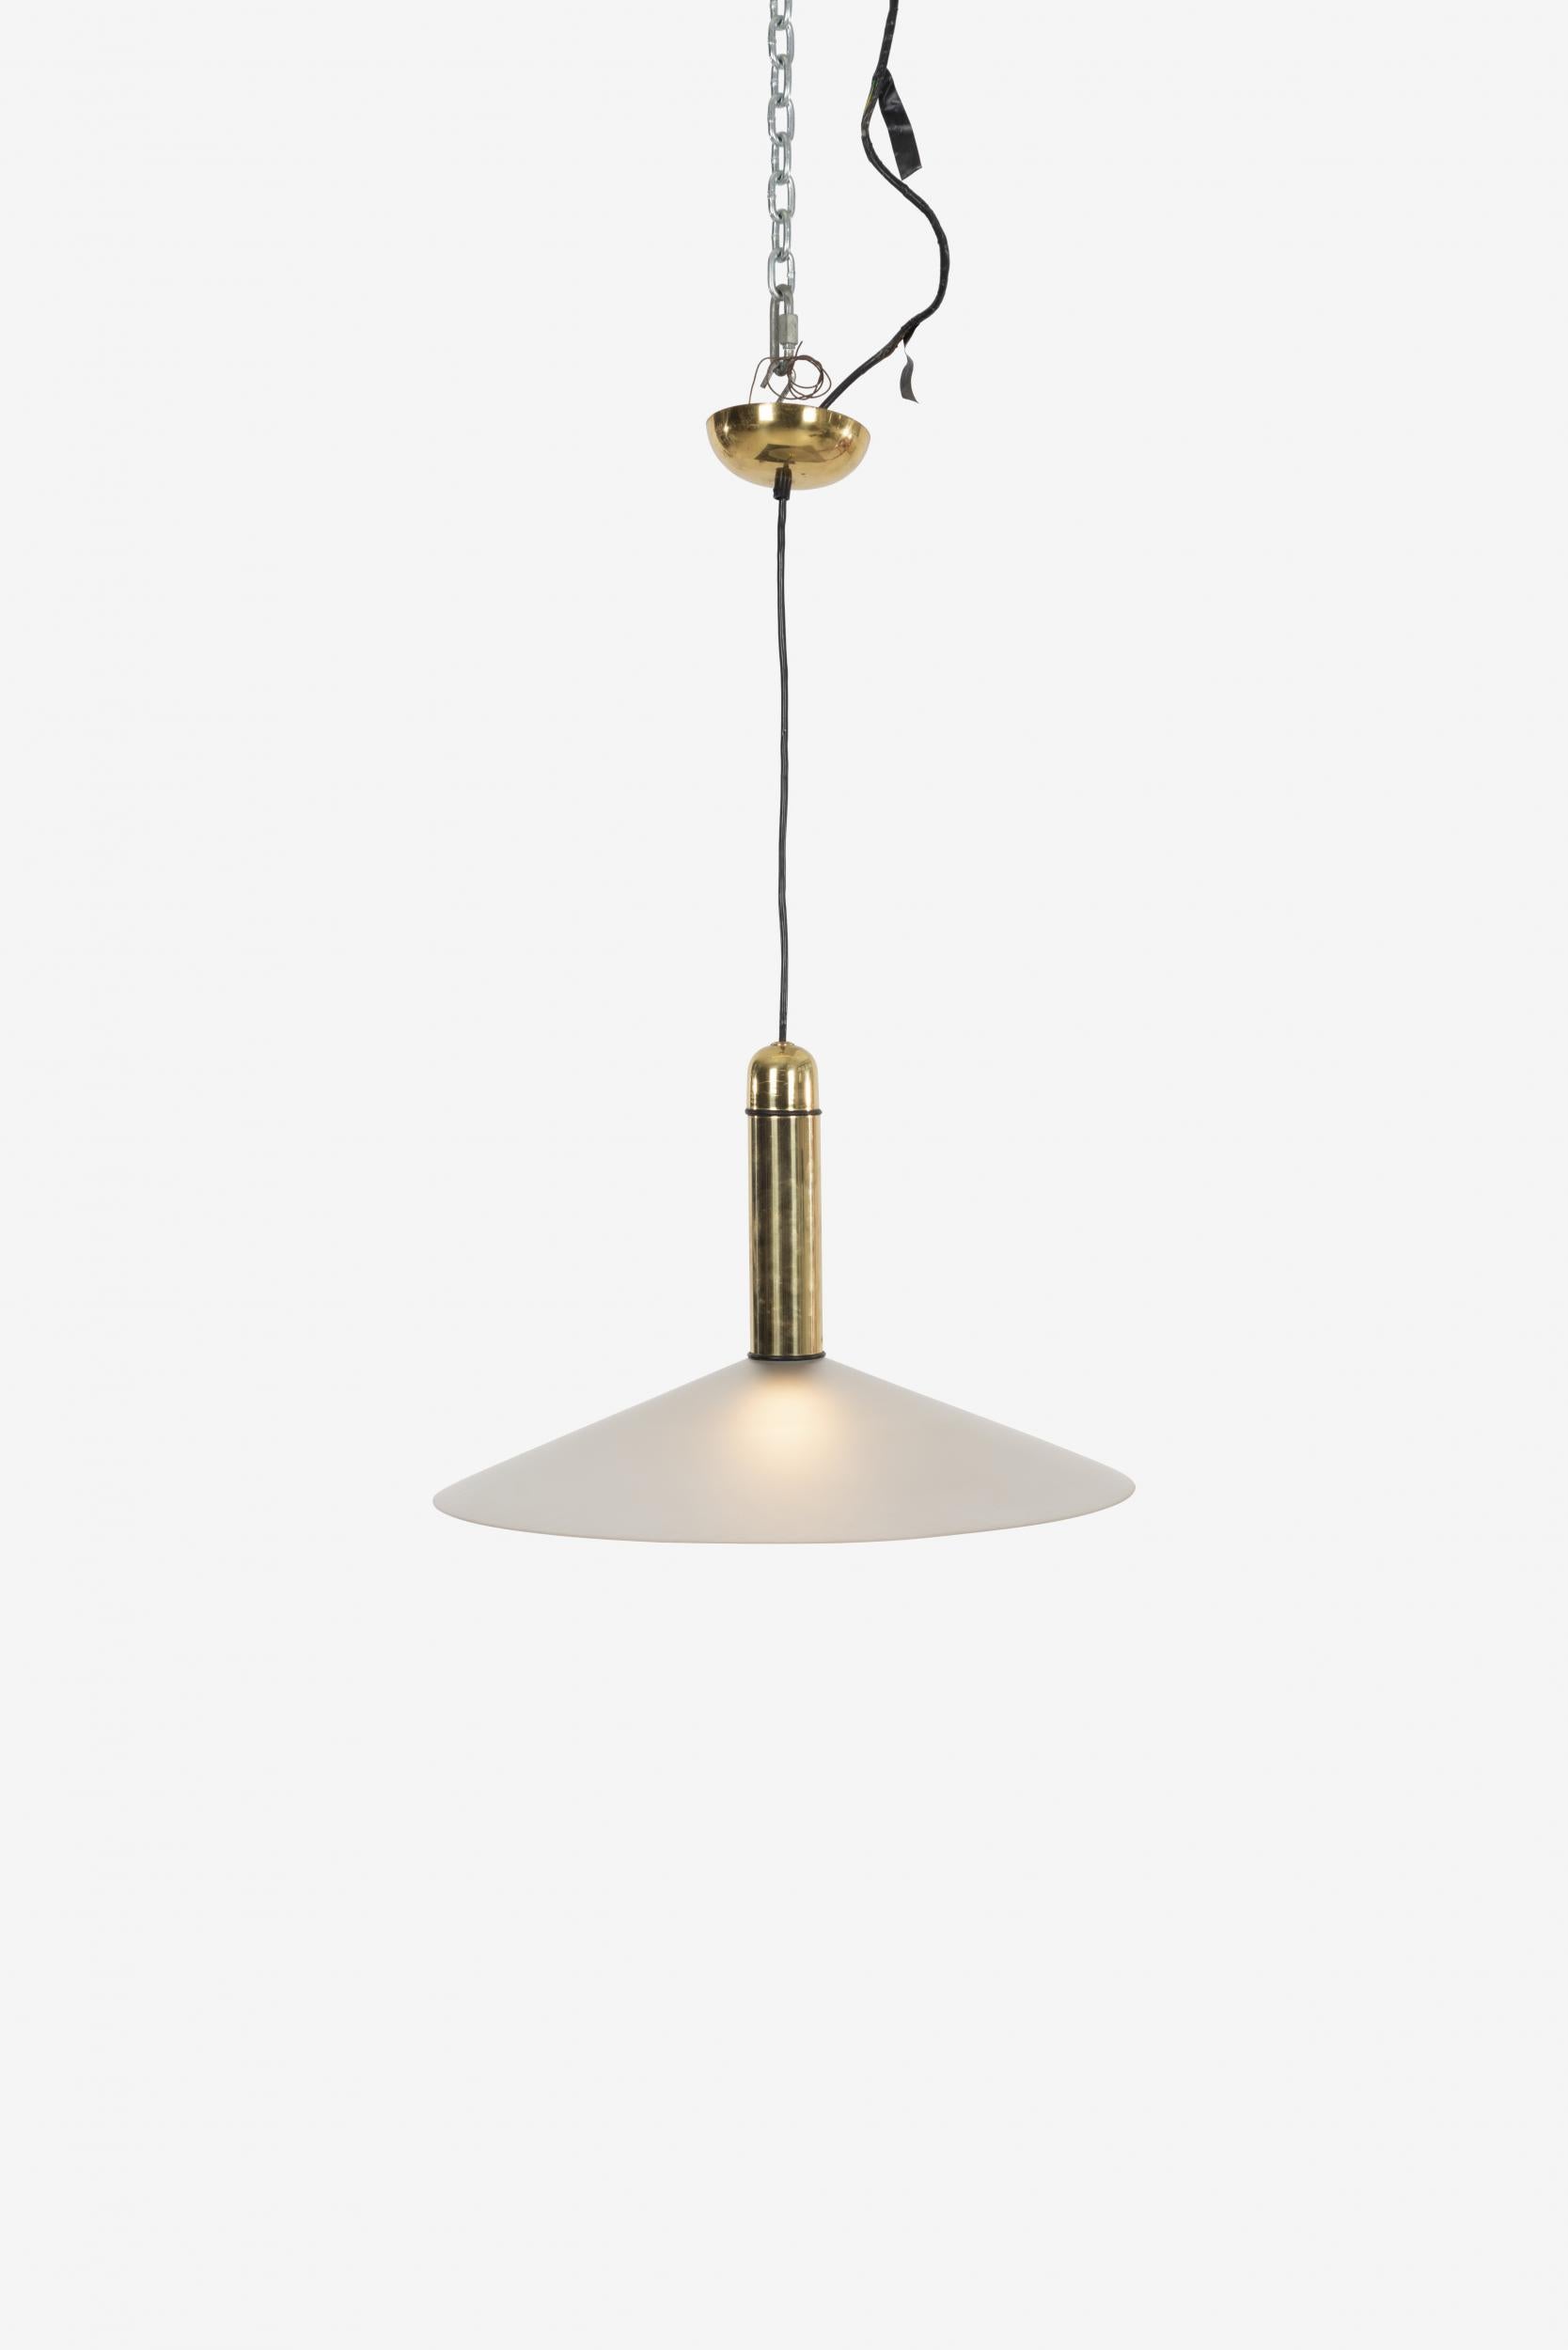 VeArt brass and Murano glass chandelier, brass stem and original canopy. Decal label on shade VeArt made in Italy.